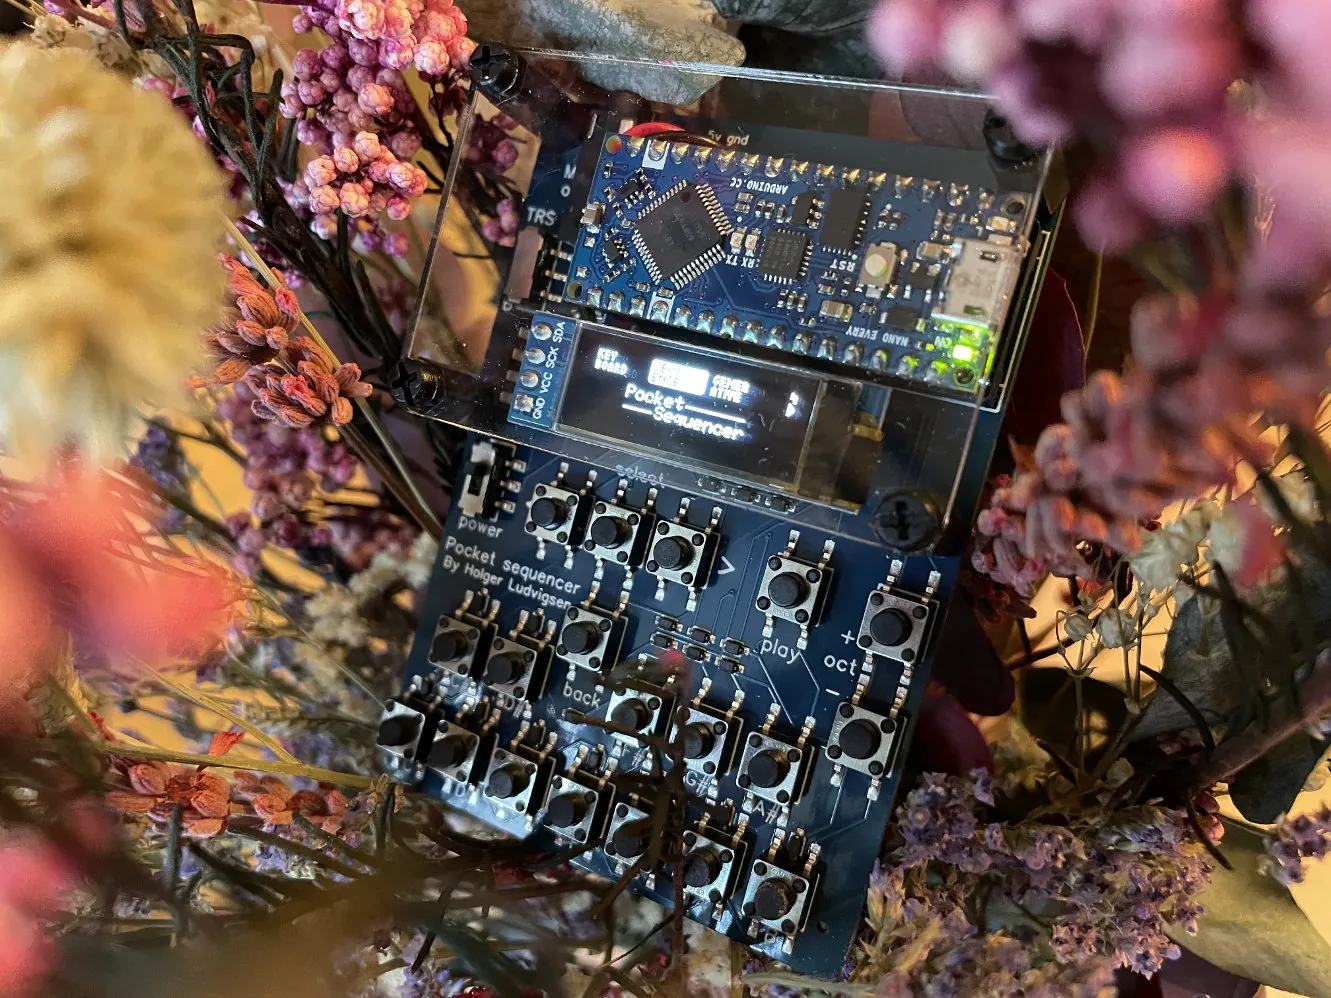 Pocket Sequencer among flowers